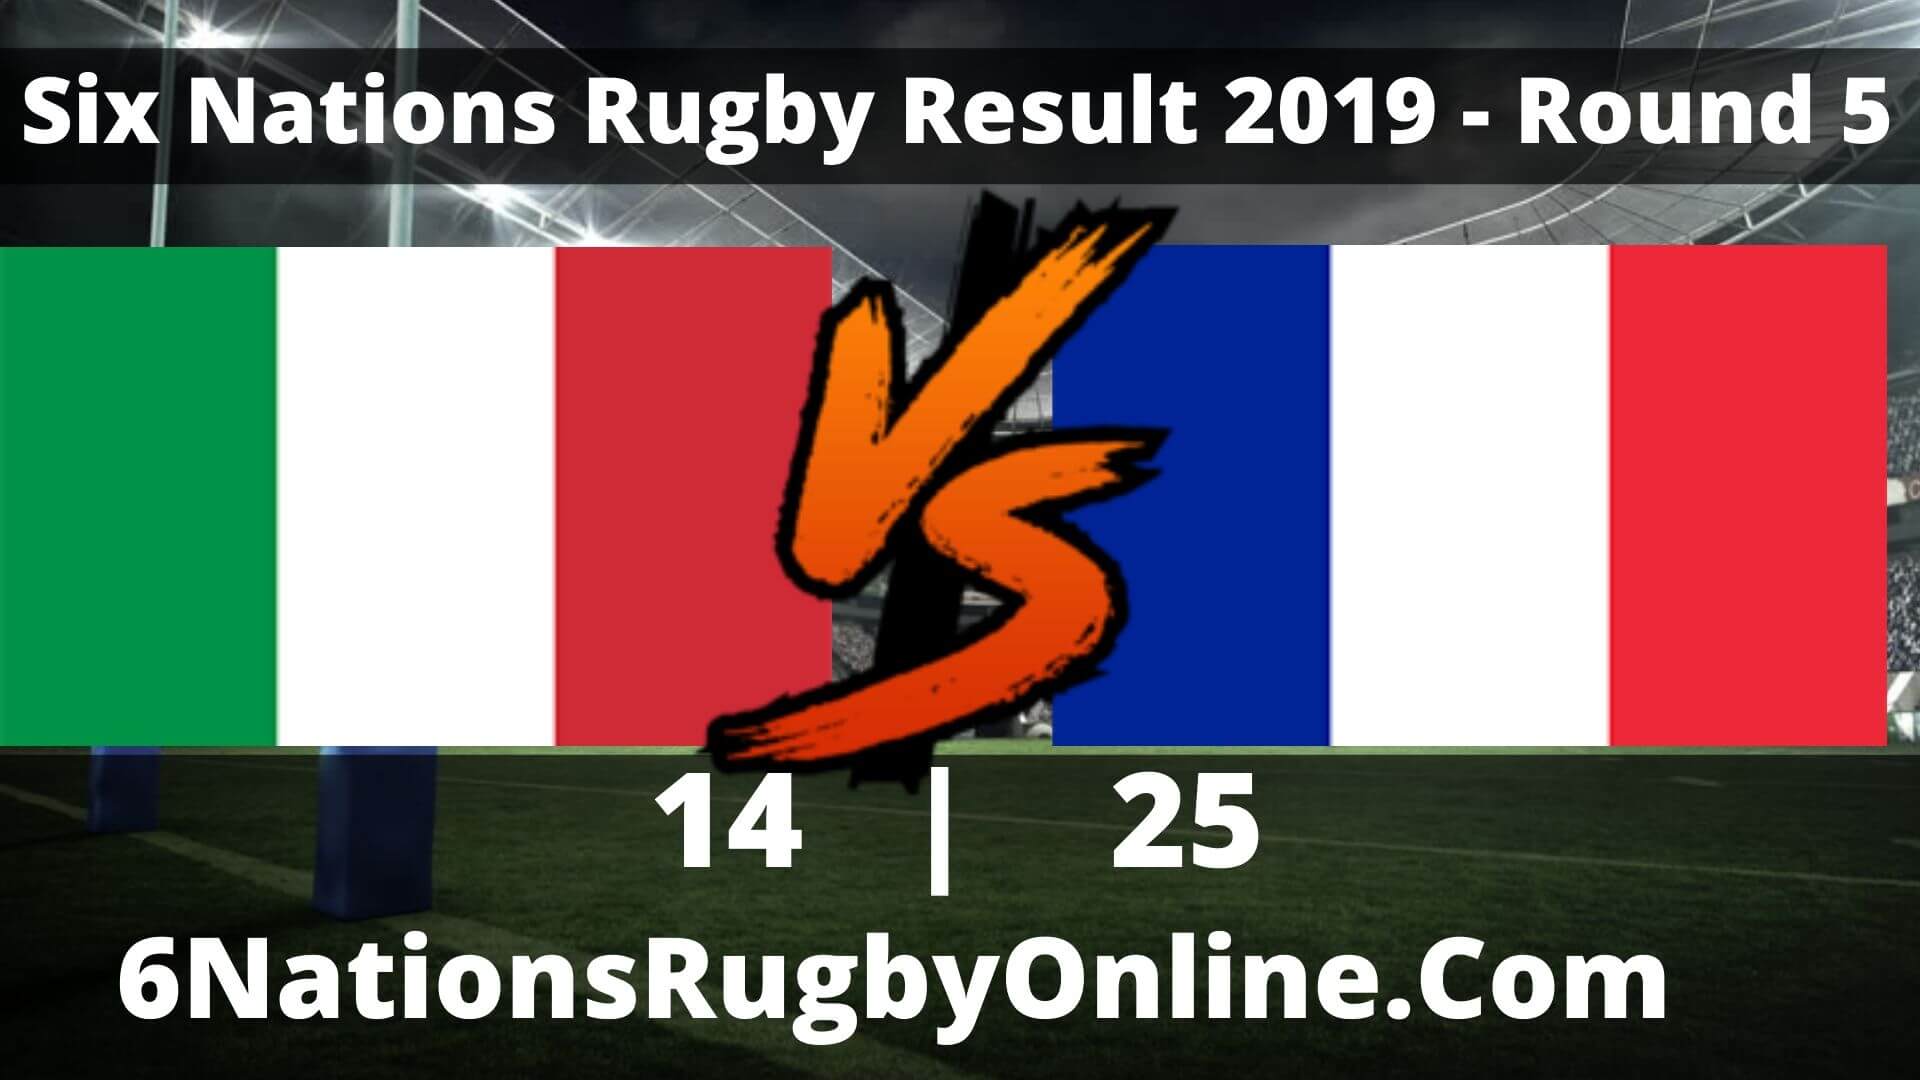 ITALY VS FRANCE Results 2019 | SIX NATIONS RUGBY ROUND 5